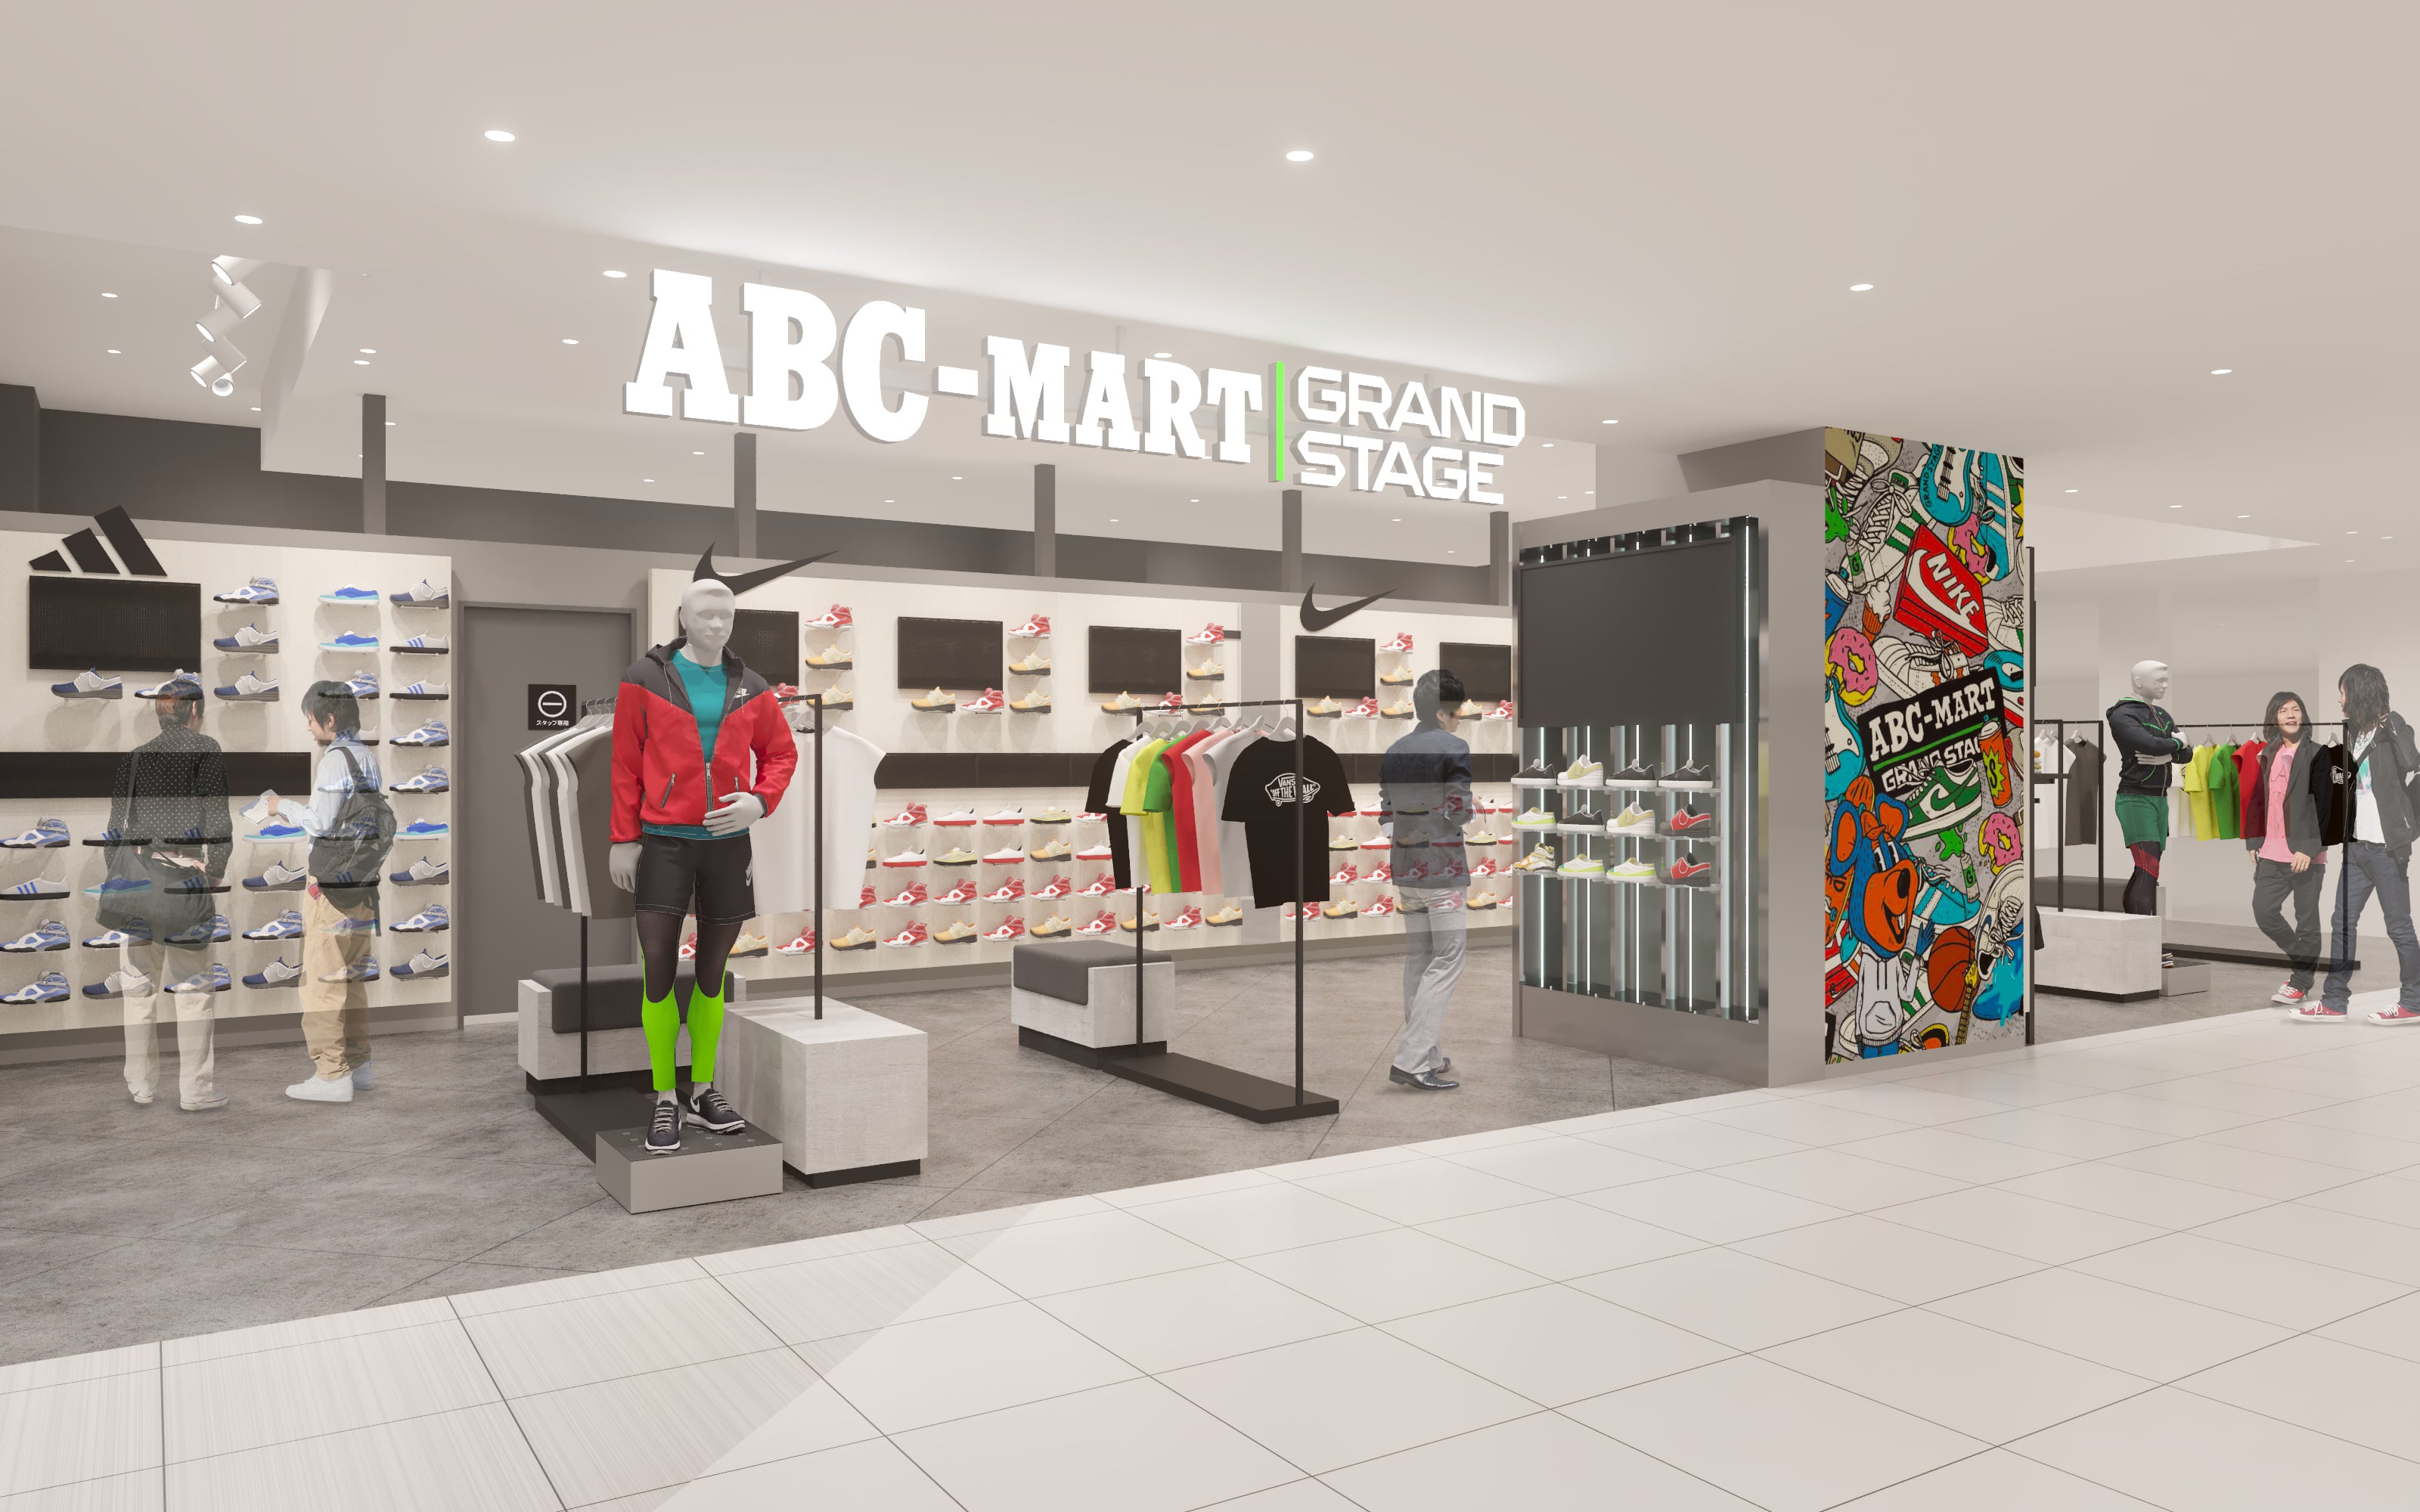 ABC-MART GRAND STAGE 